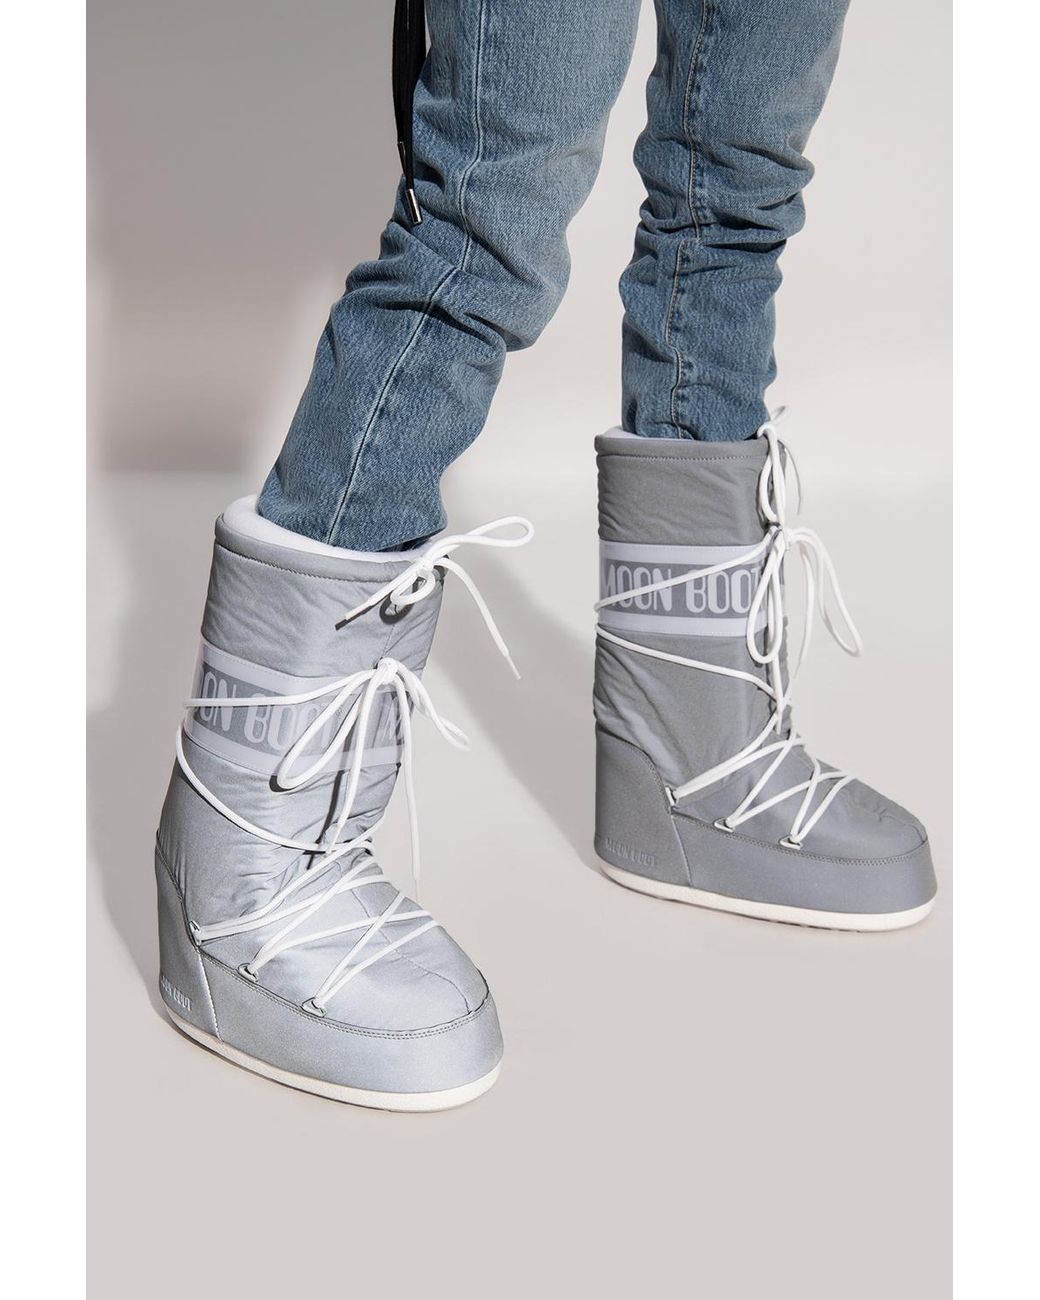 Moon Boot 'classic Reflex' Snow Boots in Grey (Gray) - Lyst